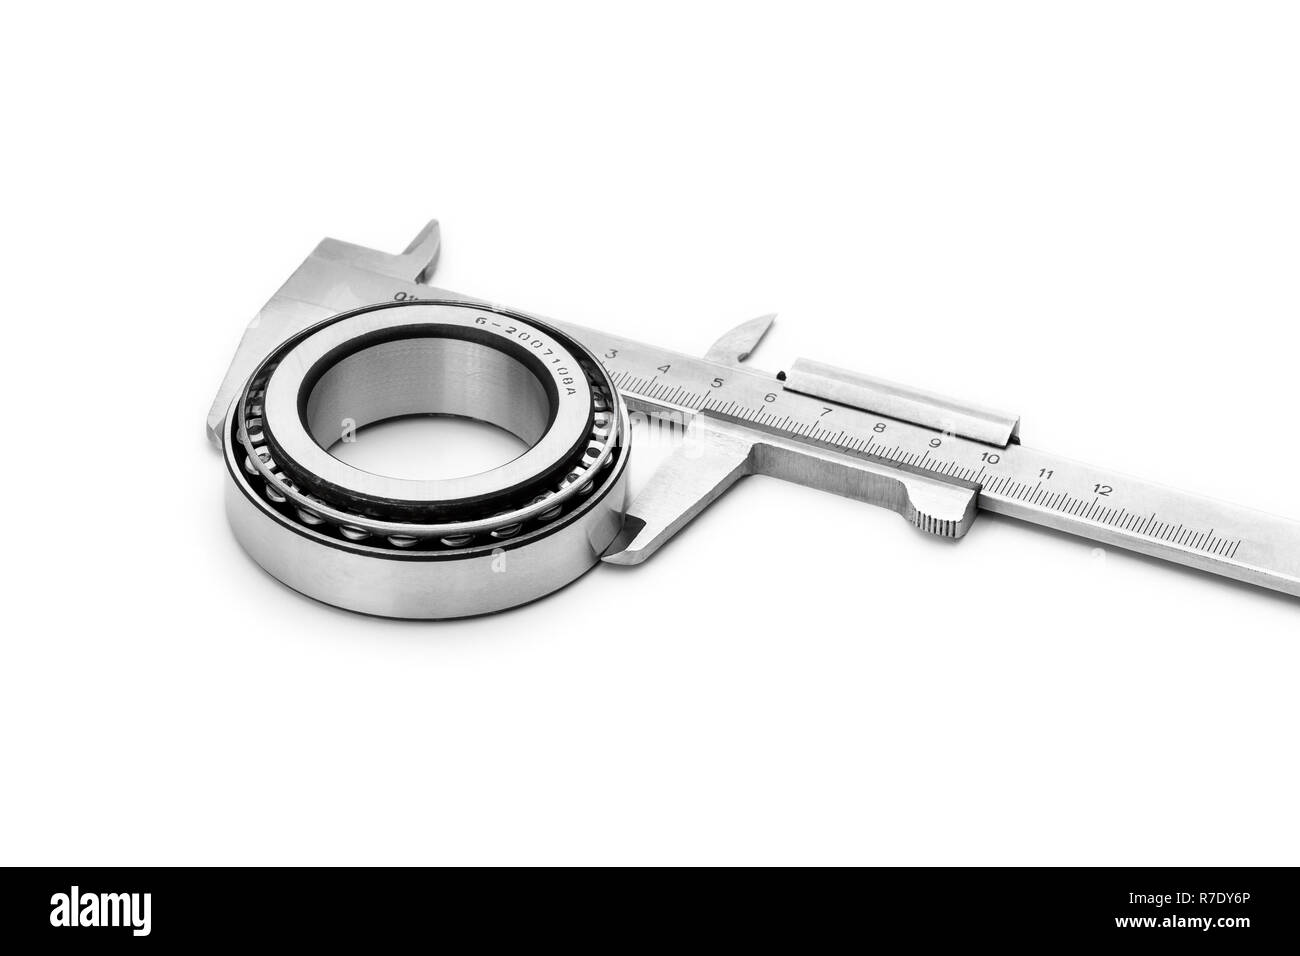 Measuring the diameter of a roller bearing with a caliper. Close-up on a white background. Stock Photo